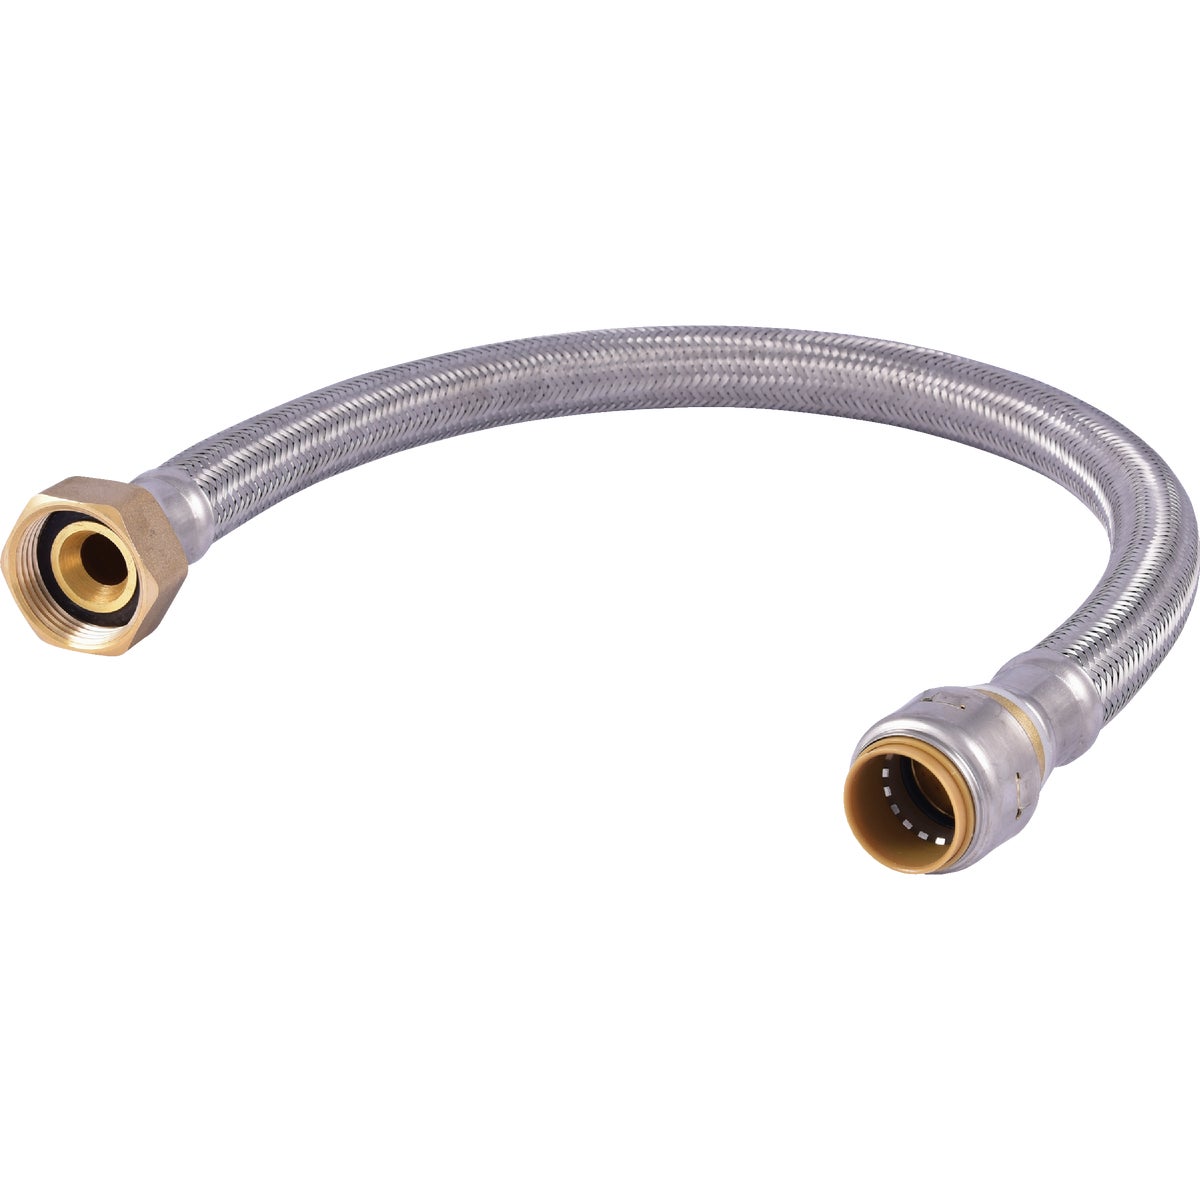 Item 401726, Stainless steel push-fit x FIP (female iron pipe) water softener connector